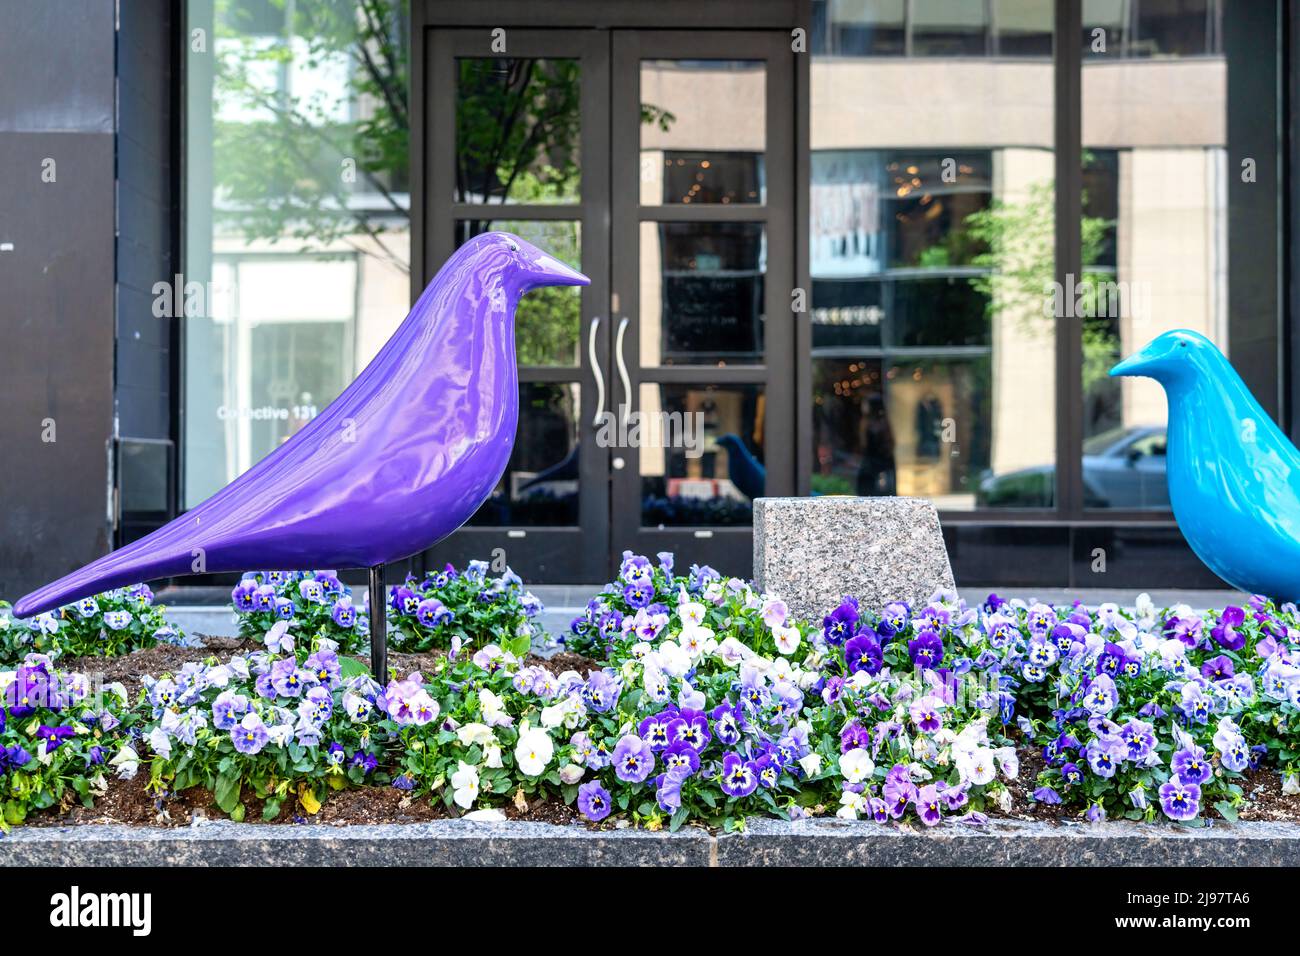 New bird shapes decorations in the gardens of Bloor Yorkville district. The series of ornament interchanges cool and warm color tones. Stock Photo